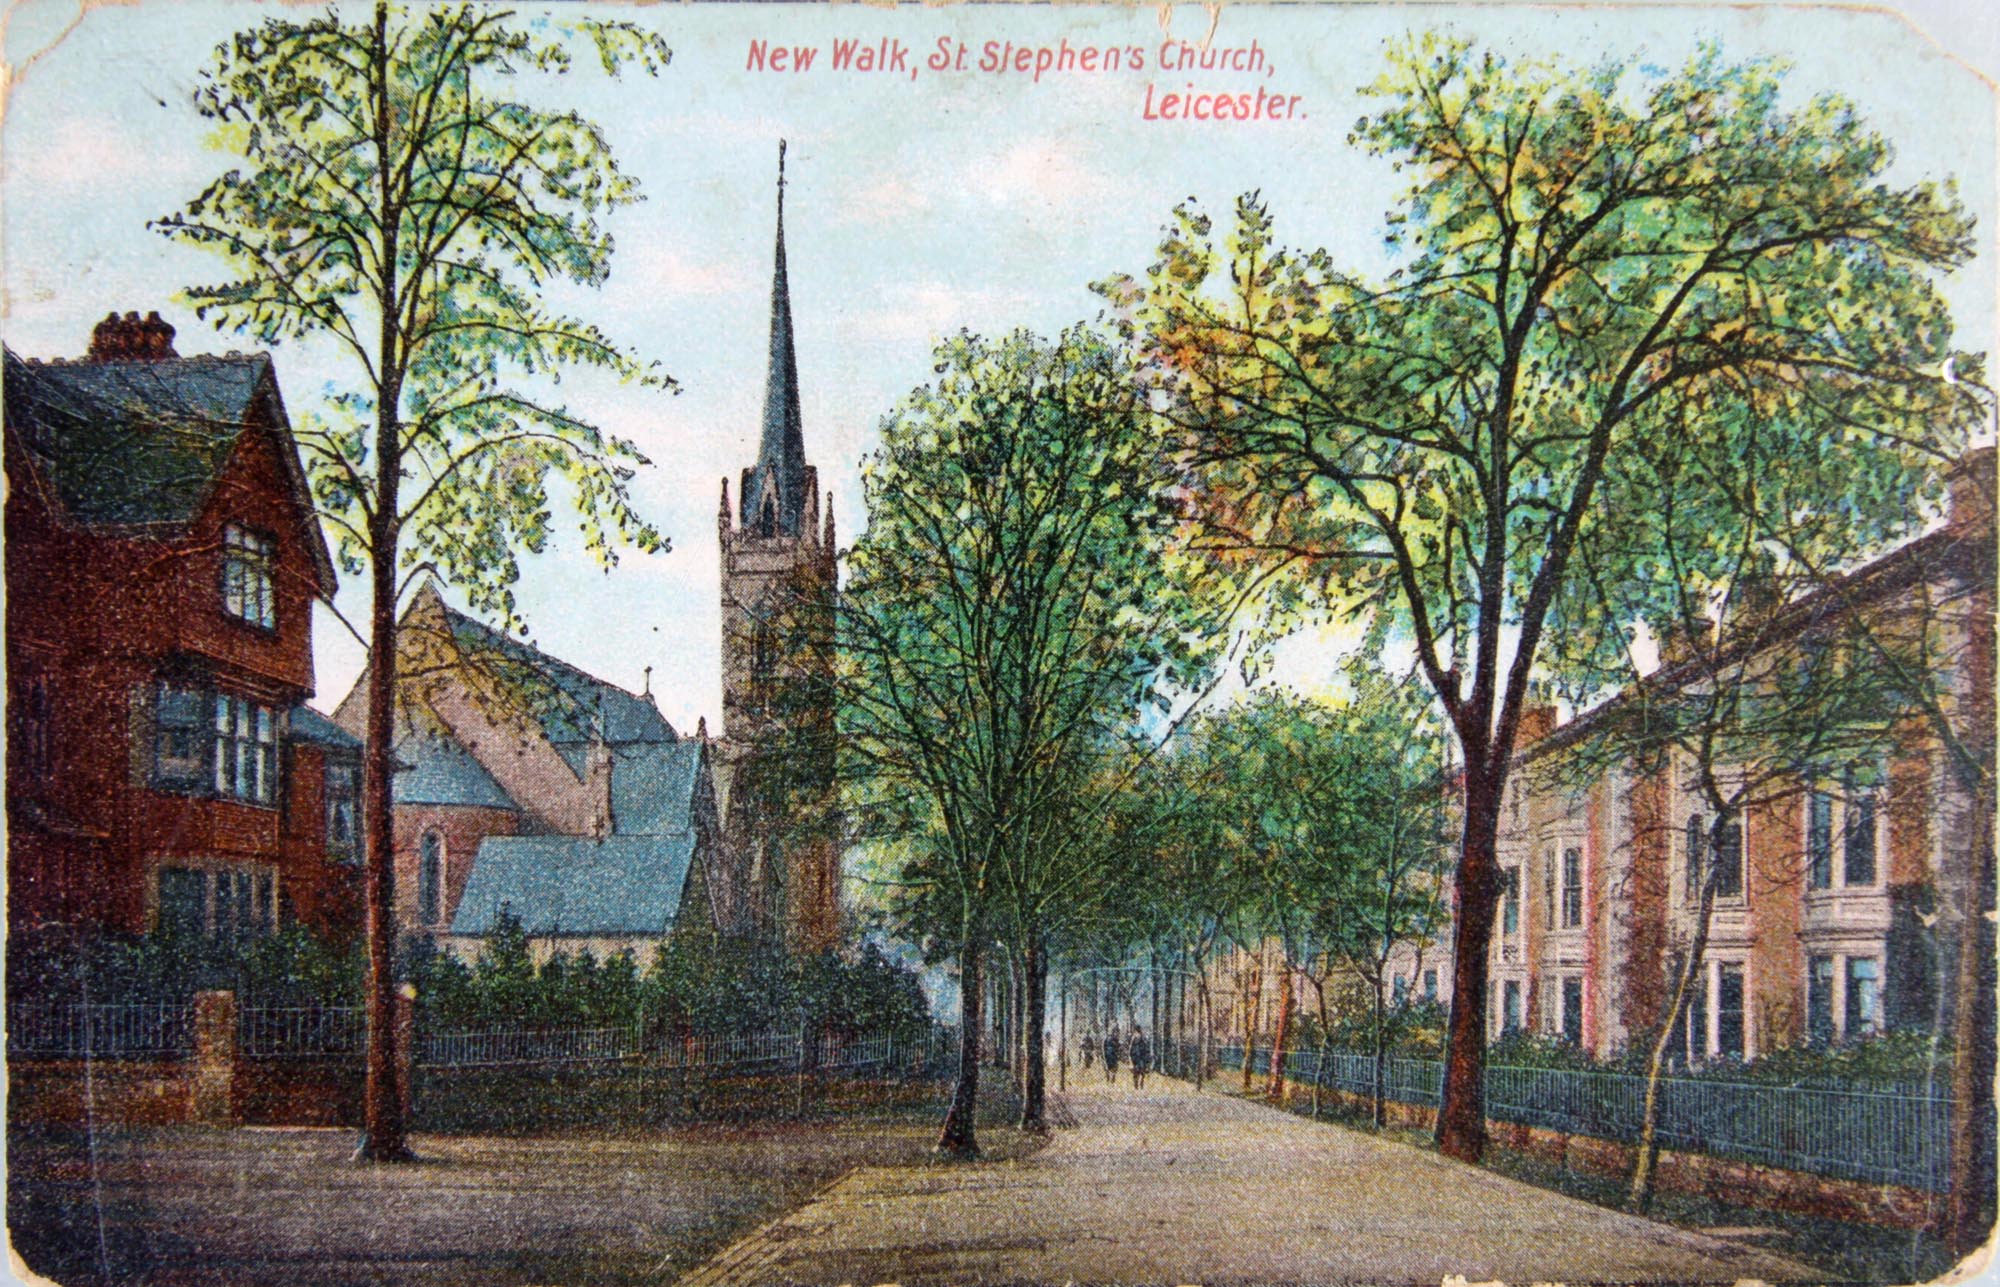 Postcard showing St Stephens Church, 1905 - Leicestershire Record Office